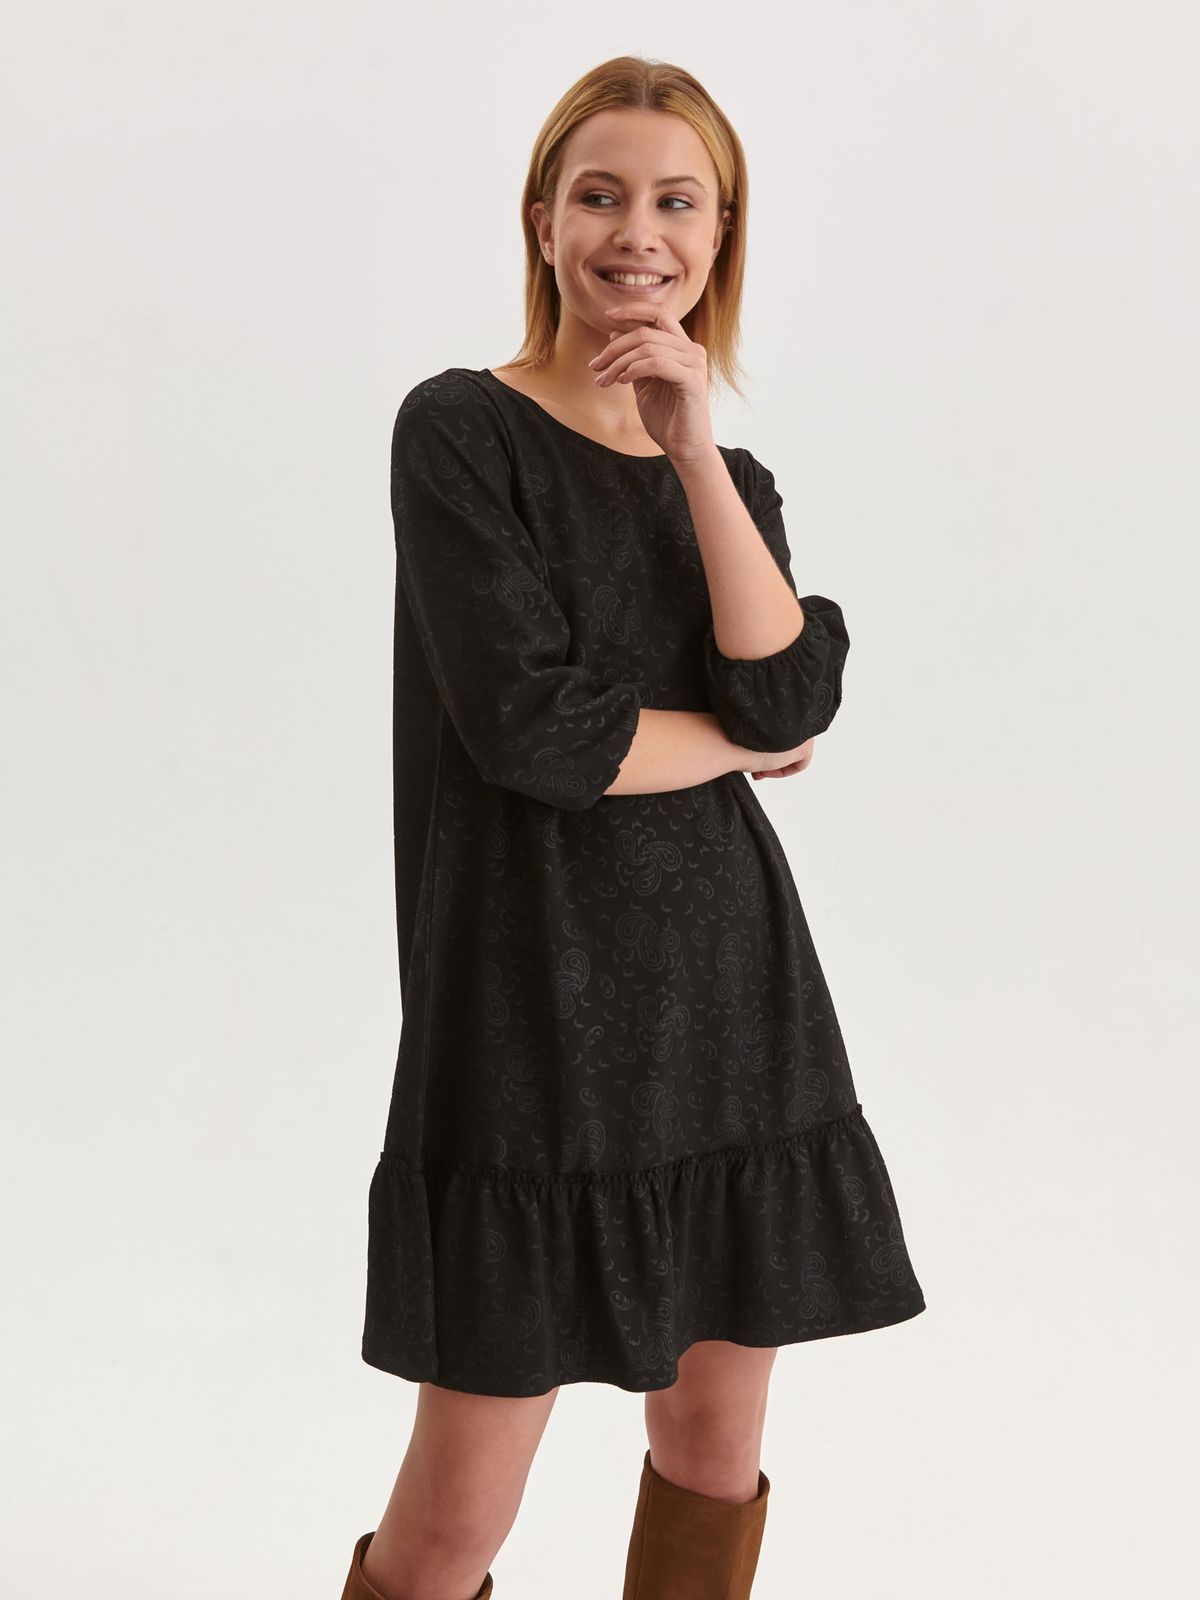 Black dress short cut a-line knitted with ruffles at the buttom of the dress